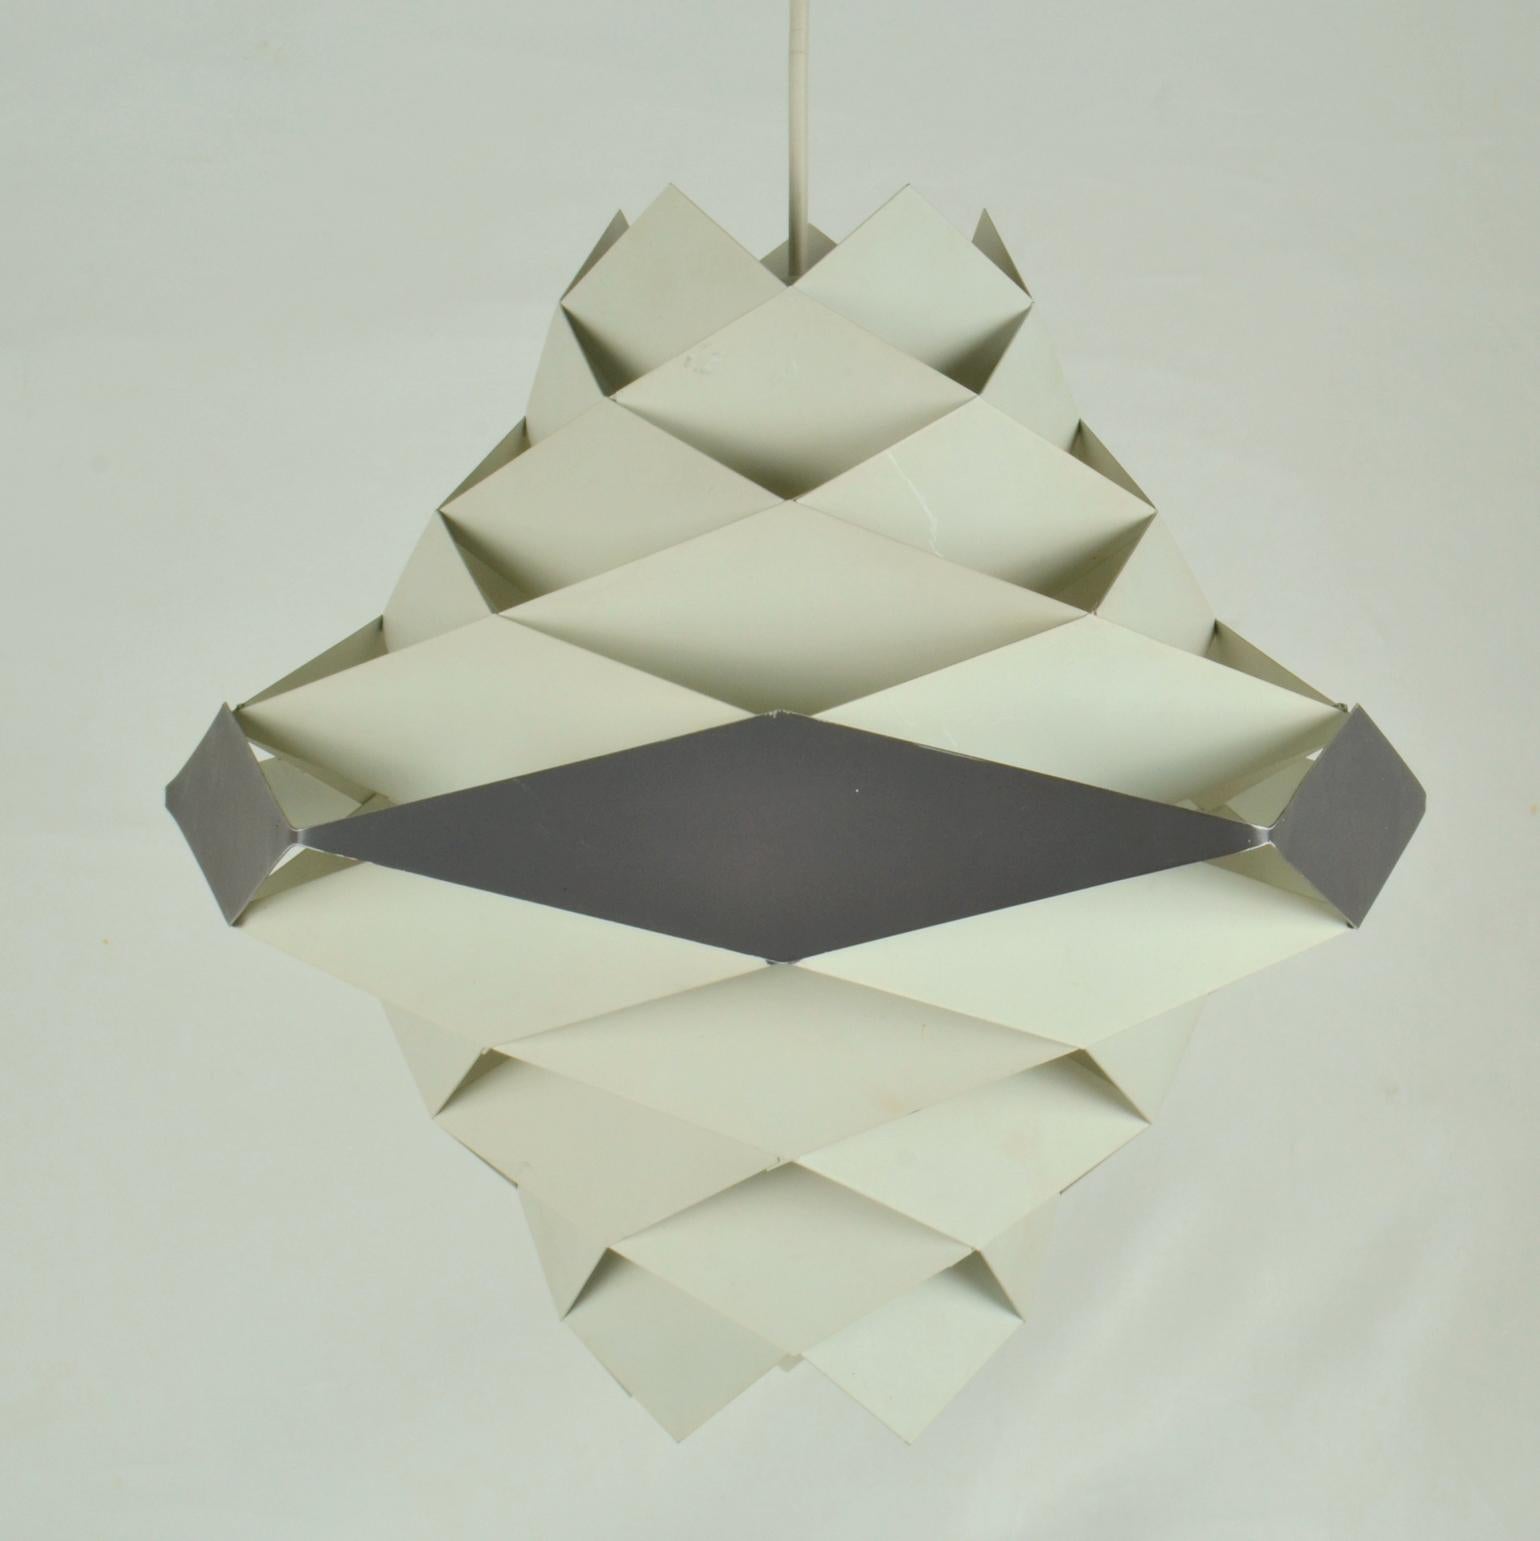 Symfoni lamp in white and dark grey-black painted metal diamonds assembled to an origami style lampshades is designed by Preben Dal (1929-1980) and produced by Hans Følsgaard Elektro.
Symfoni lamps were produced in the 1967-1970s in different sizes